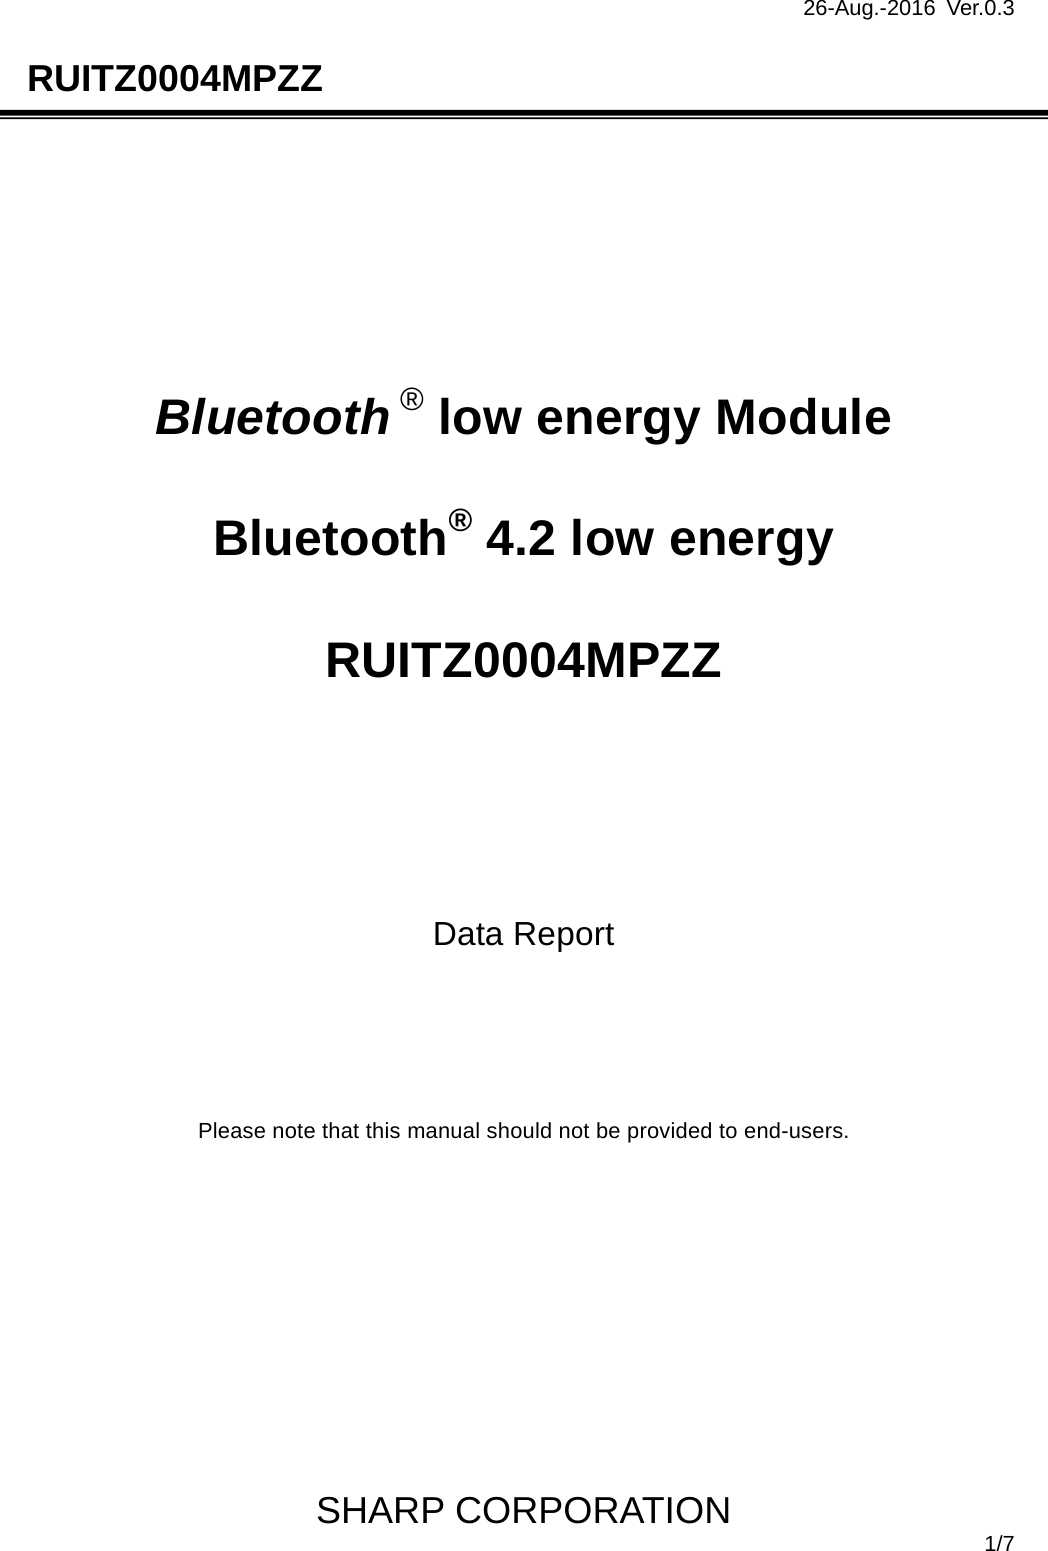 26-Aug.-2016 Ver.0.3                                                                               SHARP CORPORATION  1/7 RUITZ0004MPZZ         Bluetooth ® low energy Module   Bluetooth® 4.2 low energy   RUITZ0004MPZZ      Data Report      Please note that this manual should not be provided to end-users.            